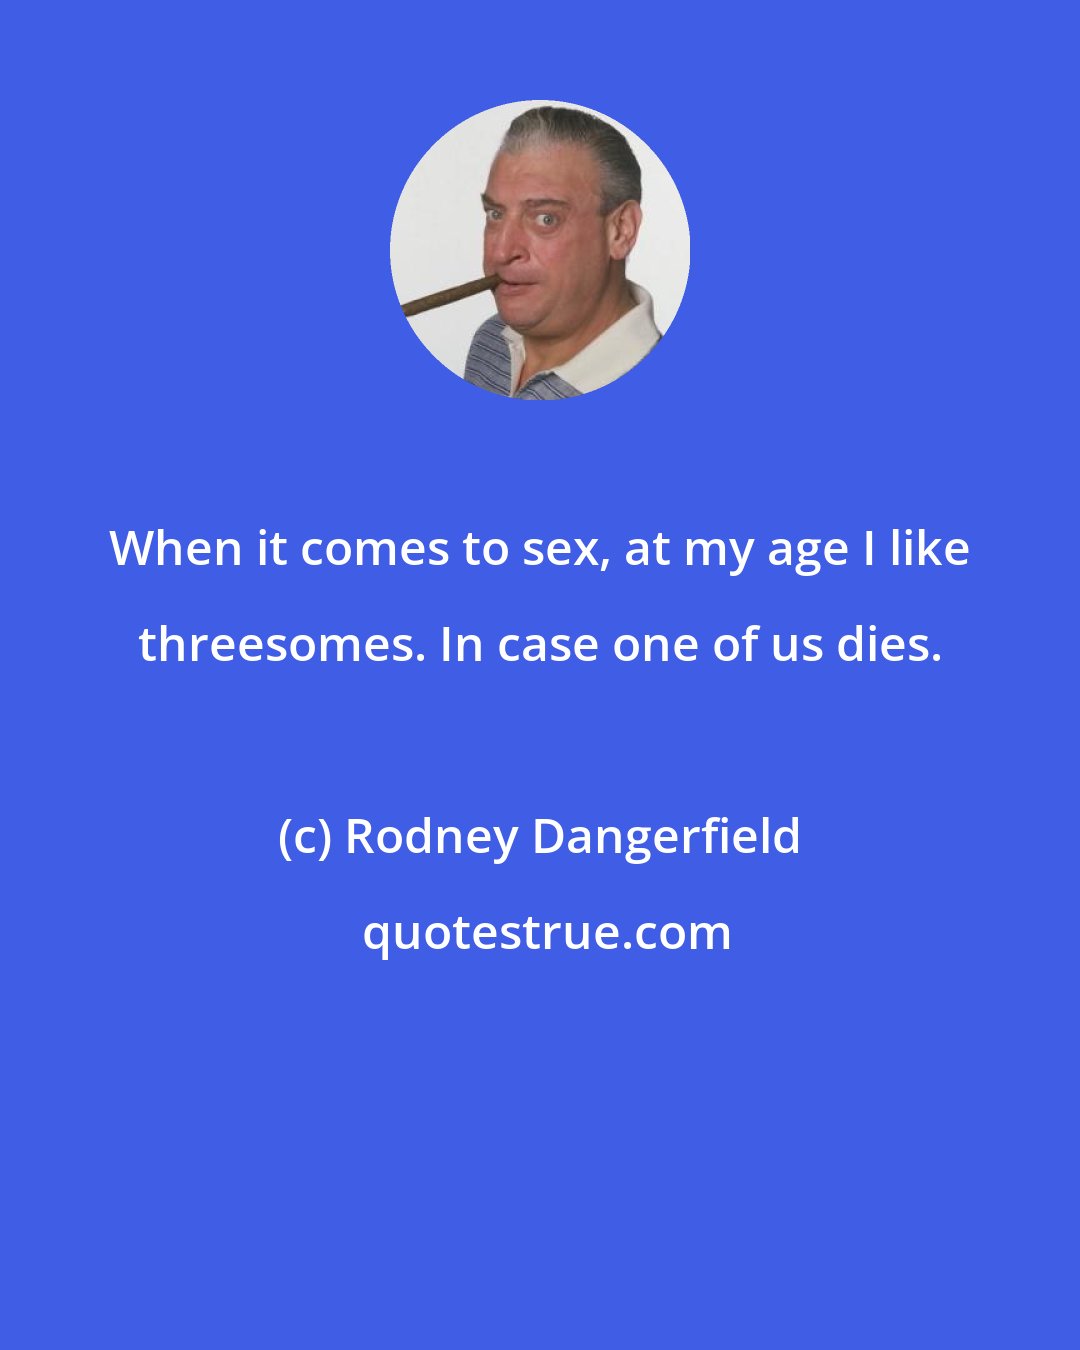 Rodney Dangerfield: When it comes to sex, at my age I like threesomes. In case one of us dies.